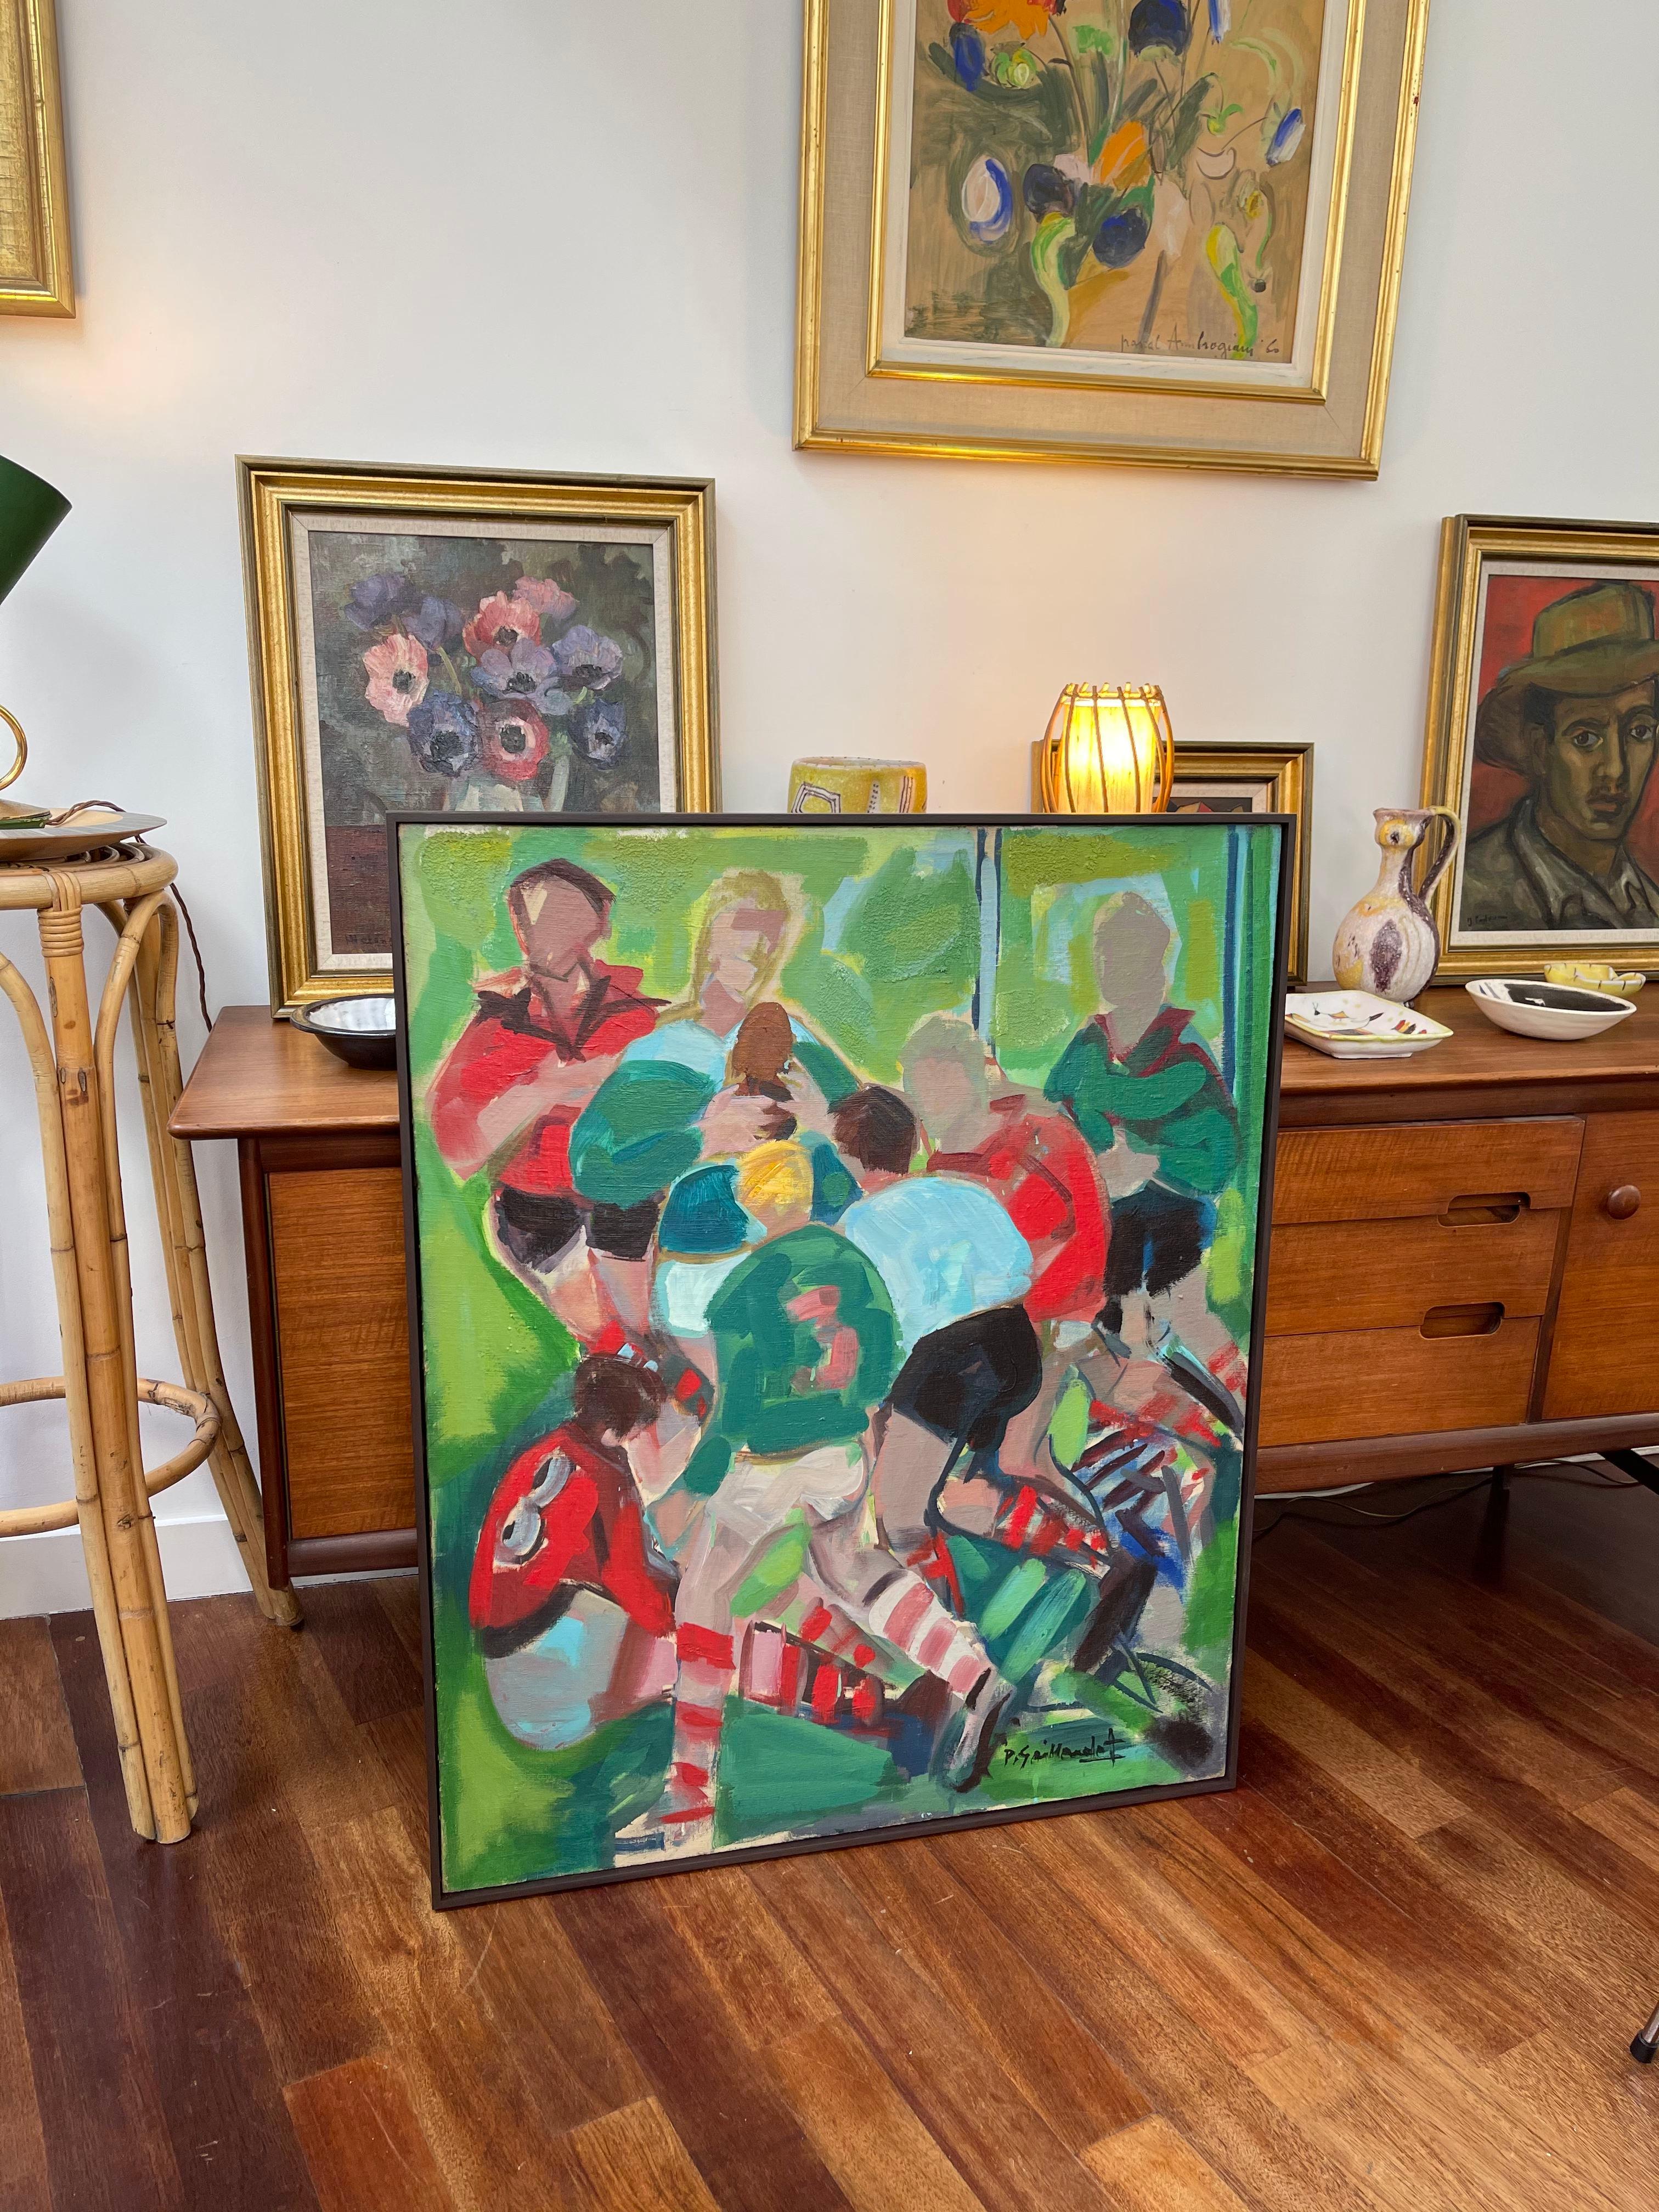 Rugby Five Nations Tournament: Ireland v Wales - Expressionist Painting by Pierre Gaillardot